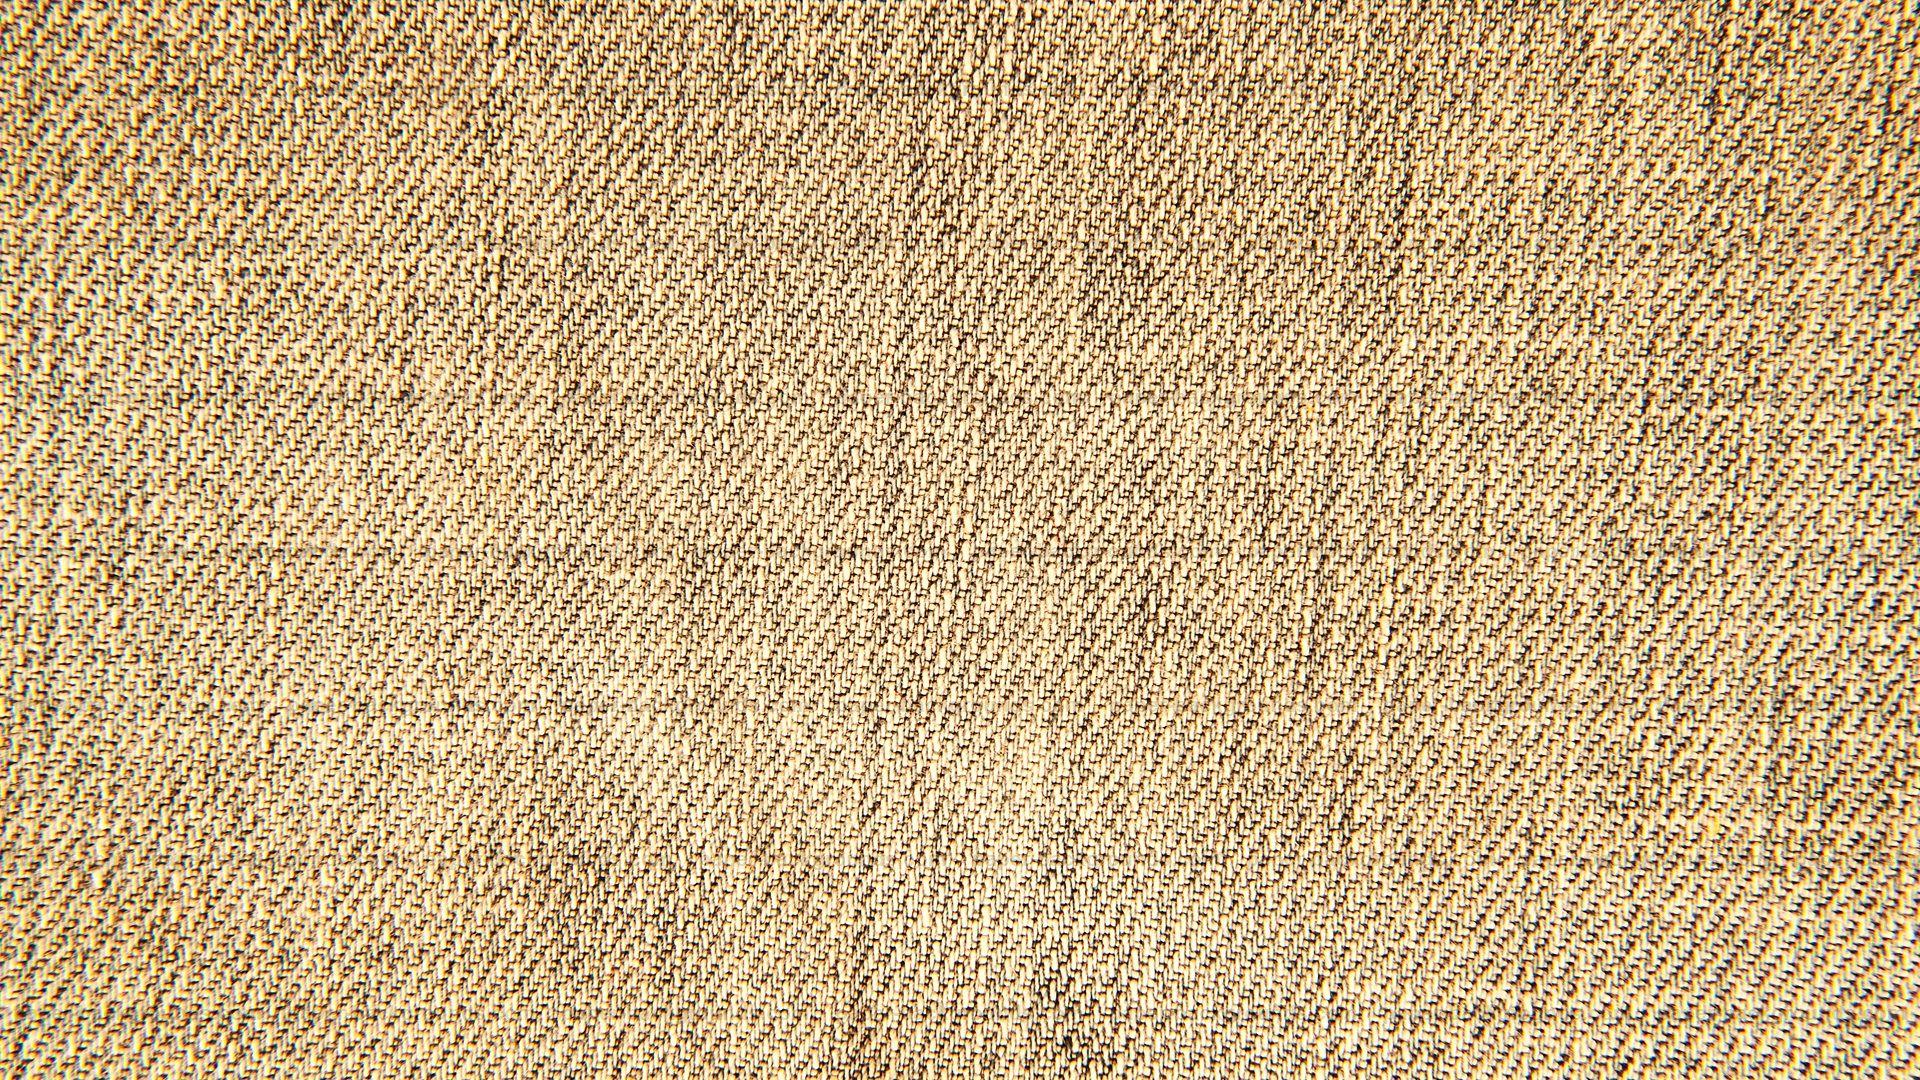 Cloth Texture Wallpapers - Top Free Cloth Texture Backgrounds ...